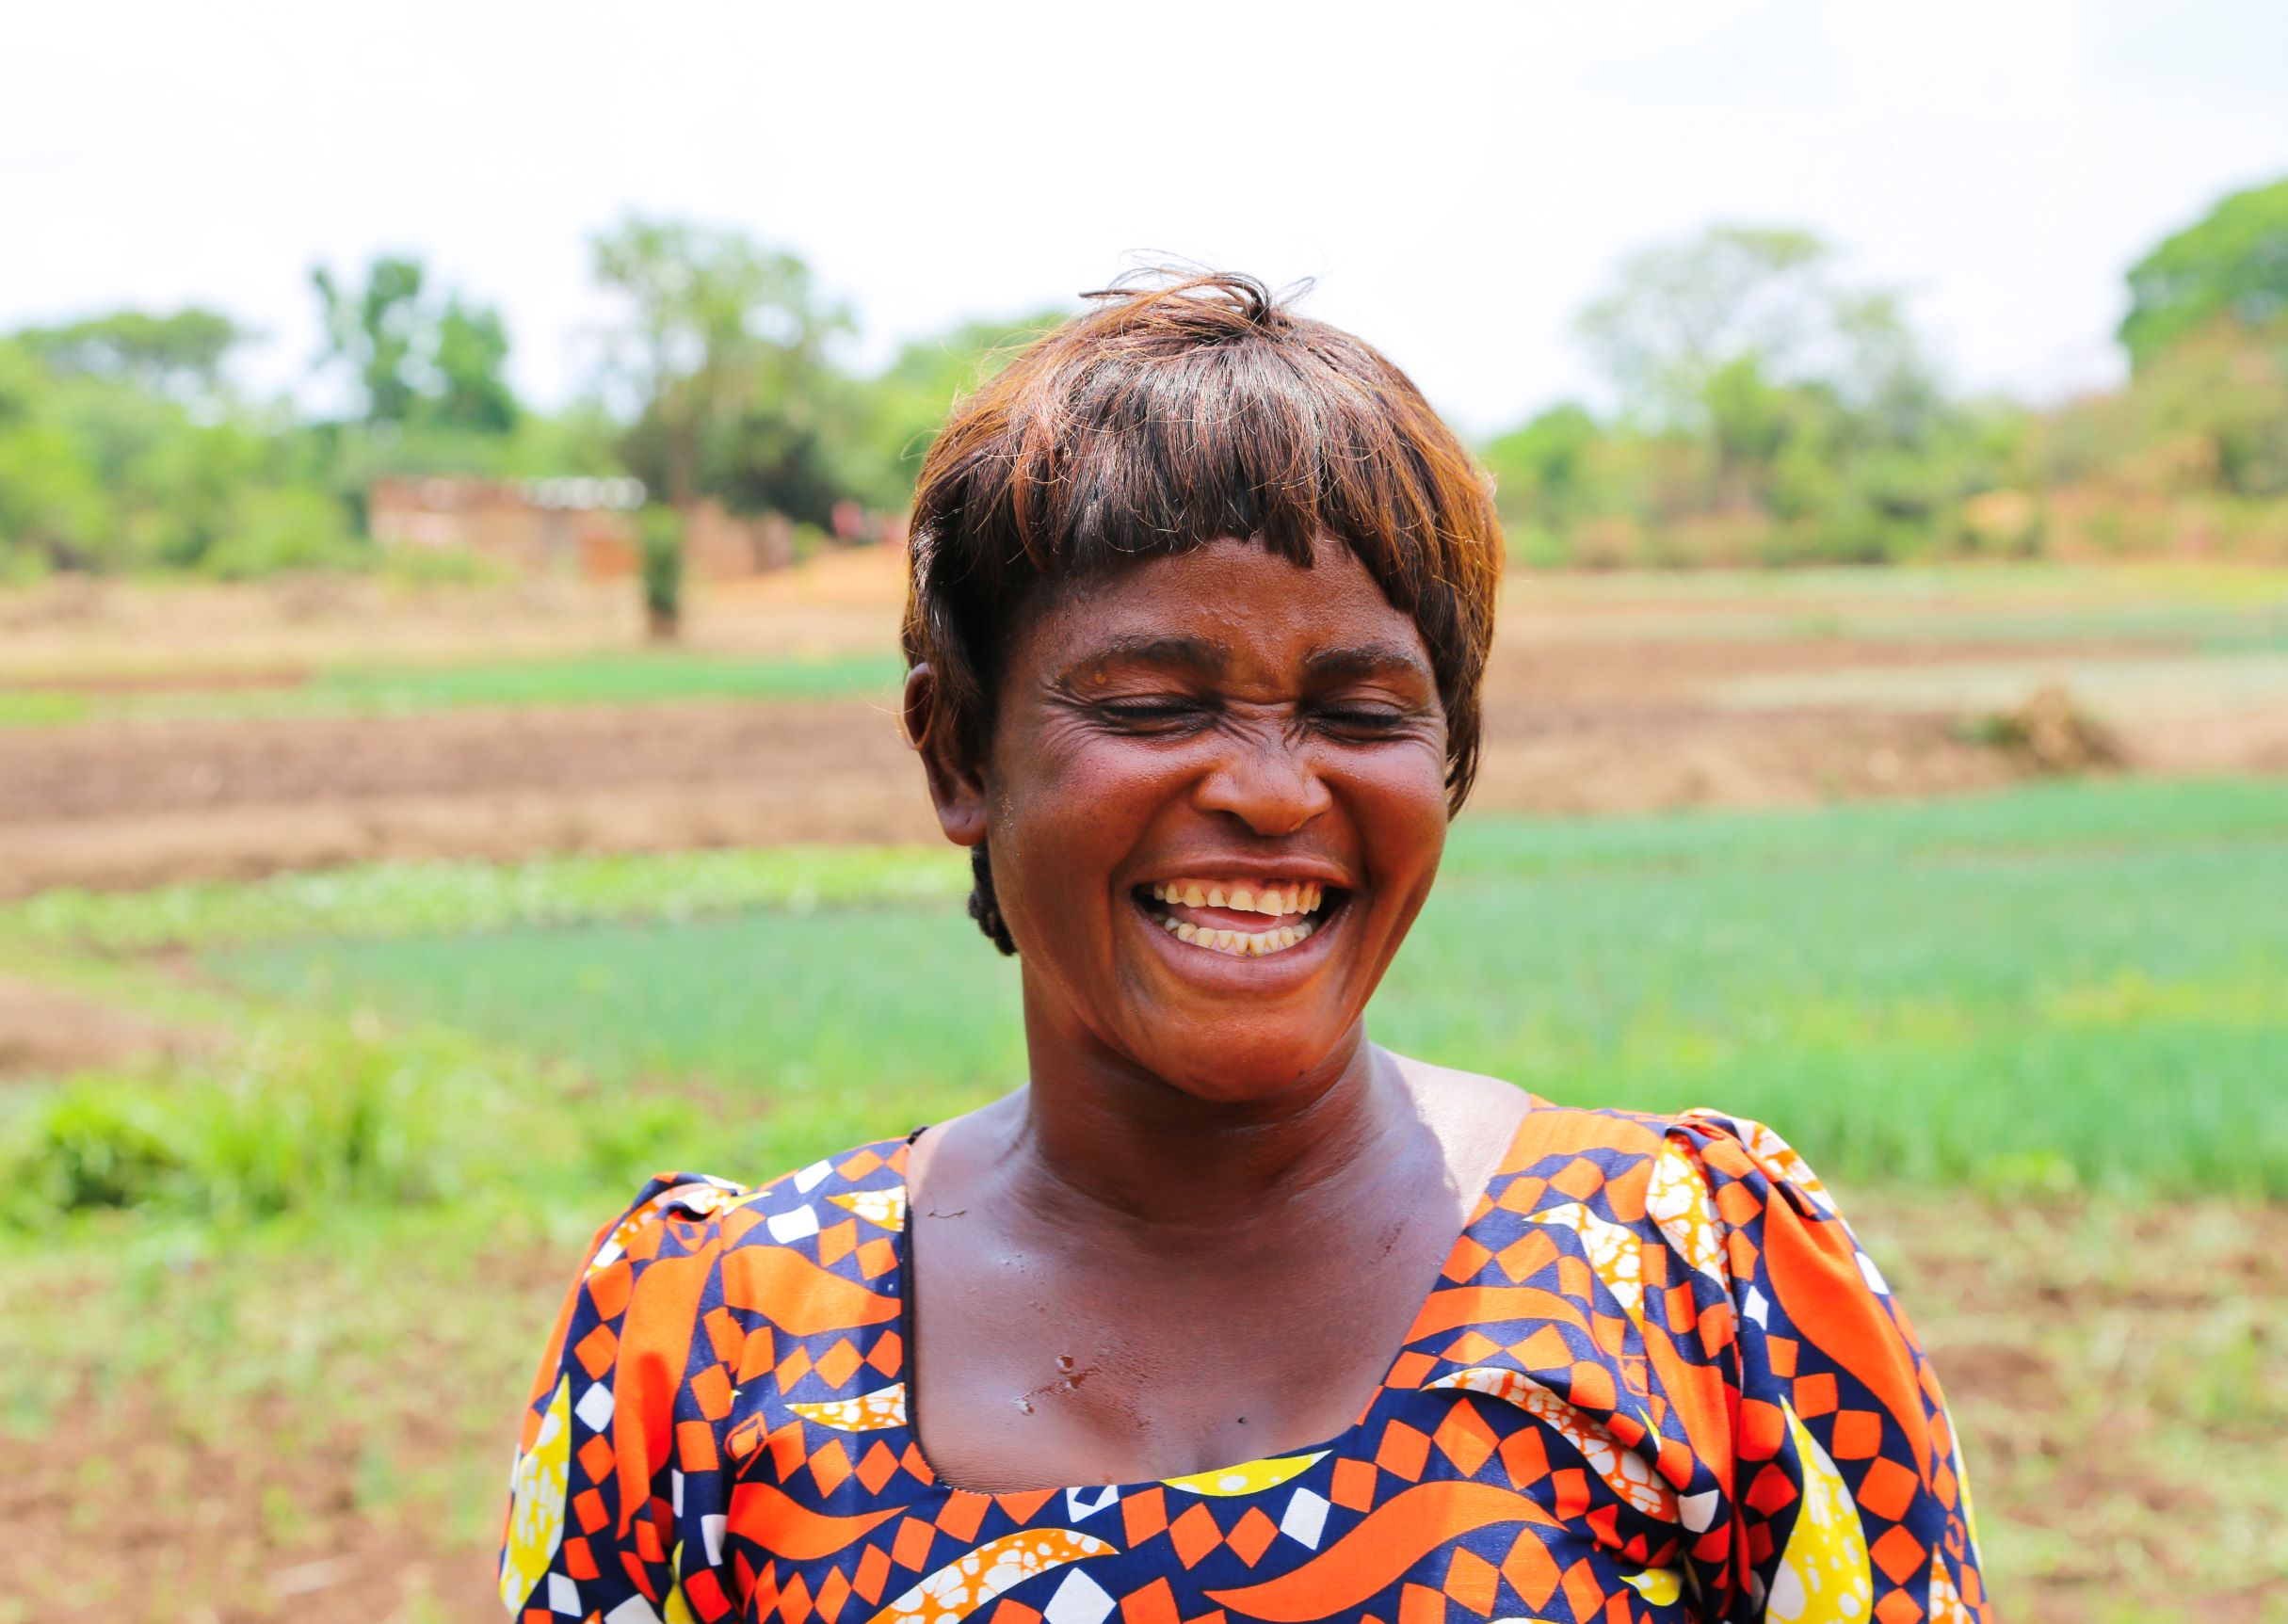 Umila, vegetable grower and mother of 11 children